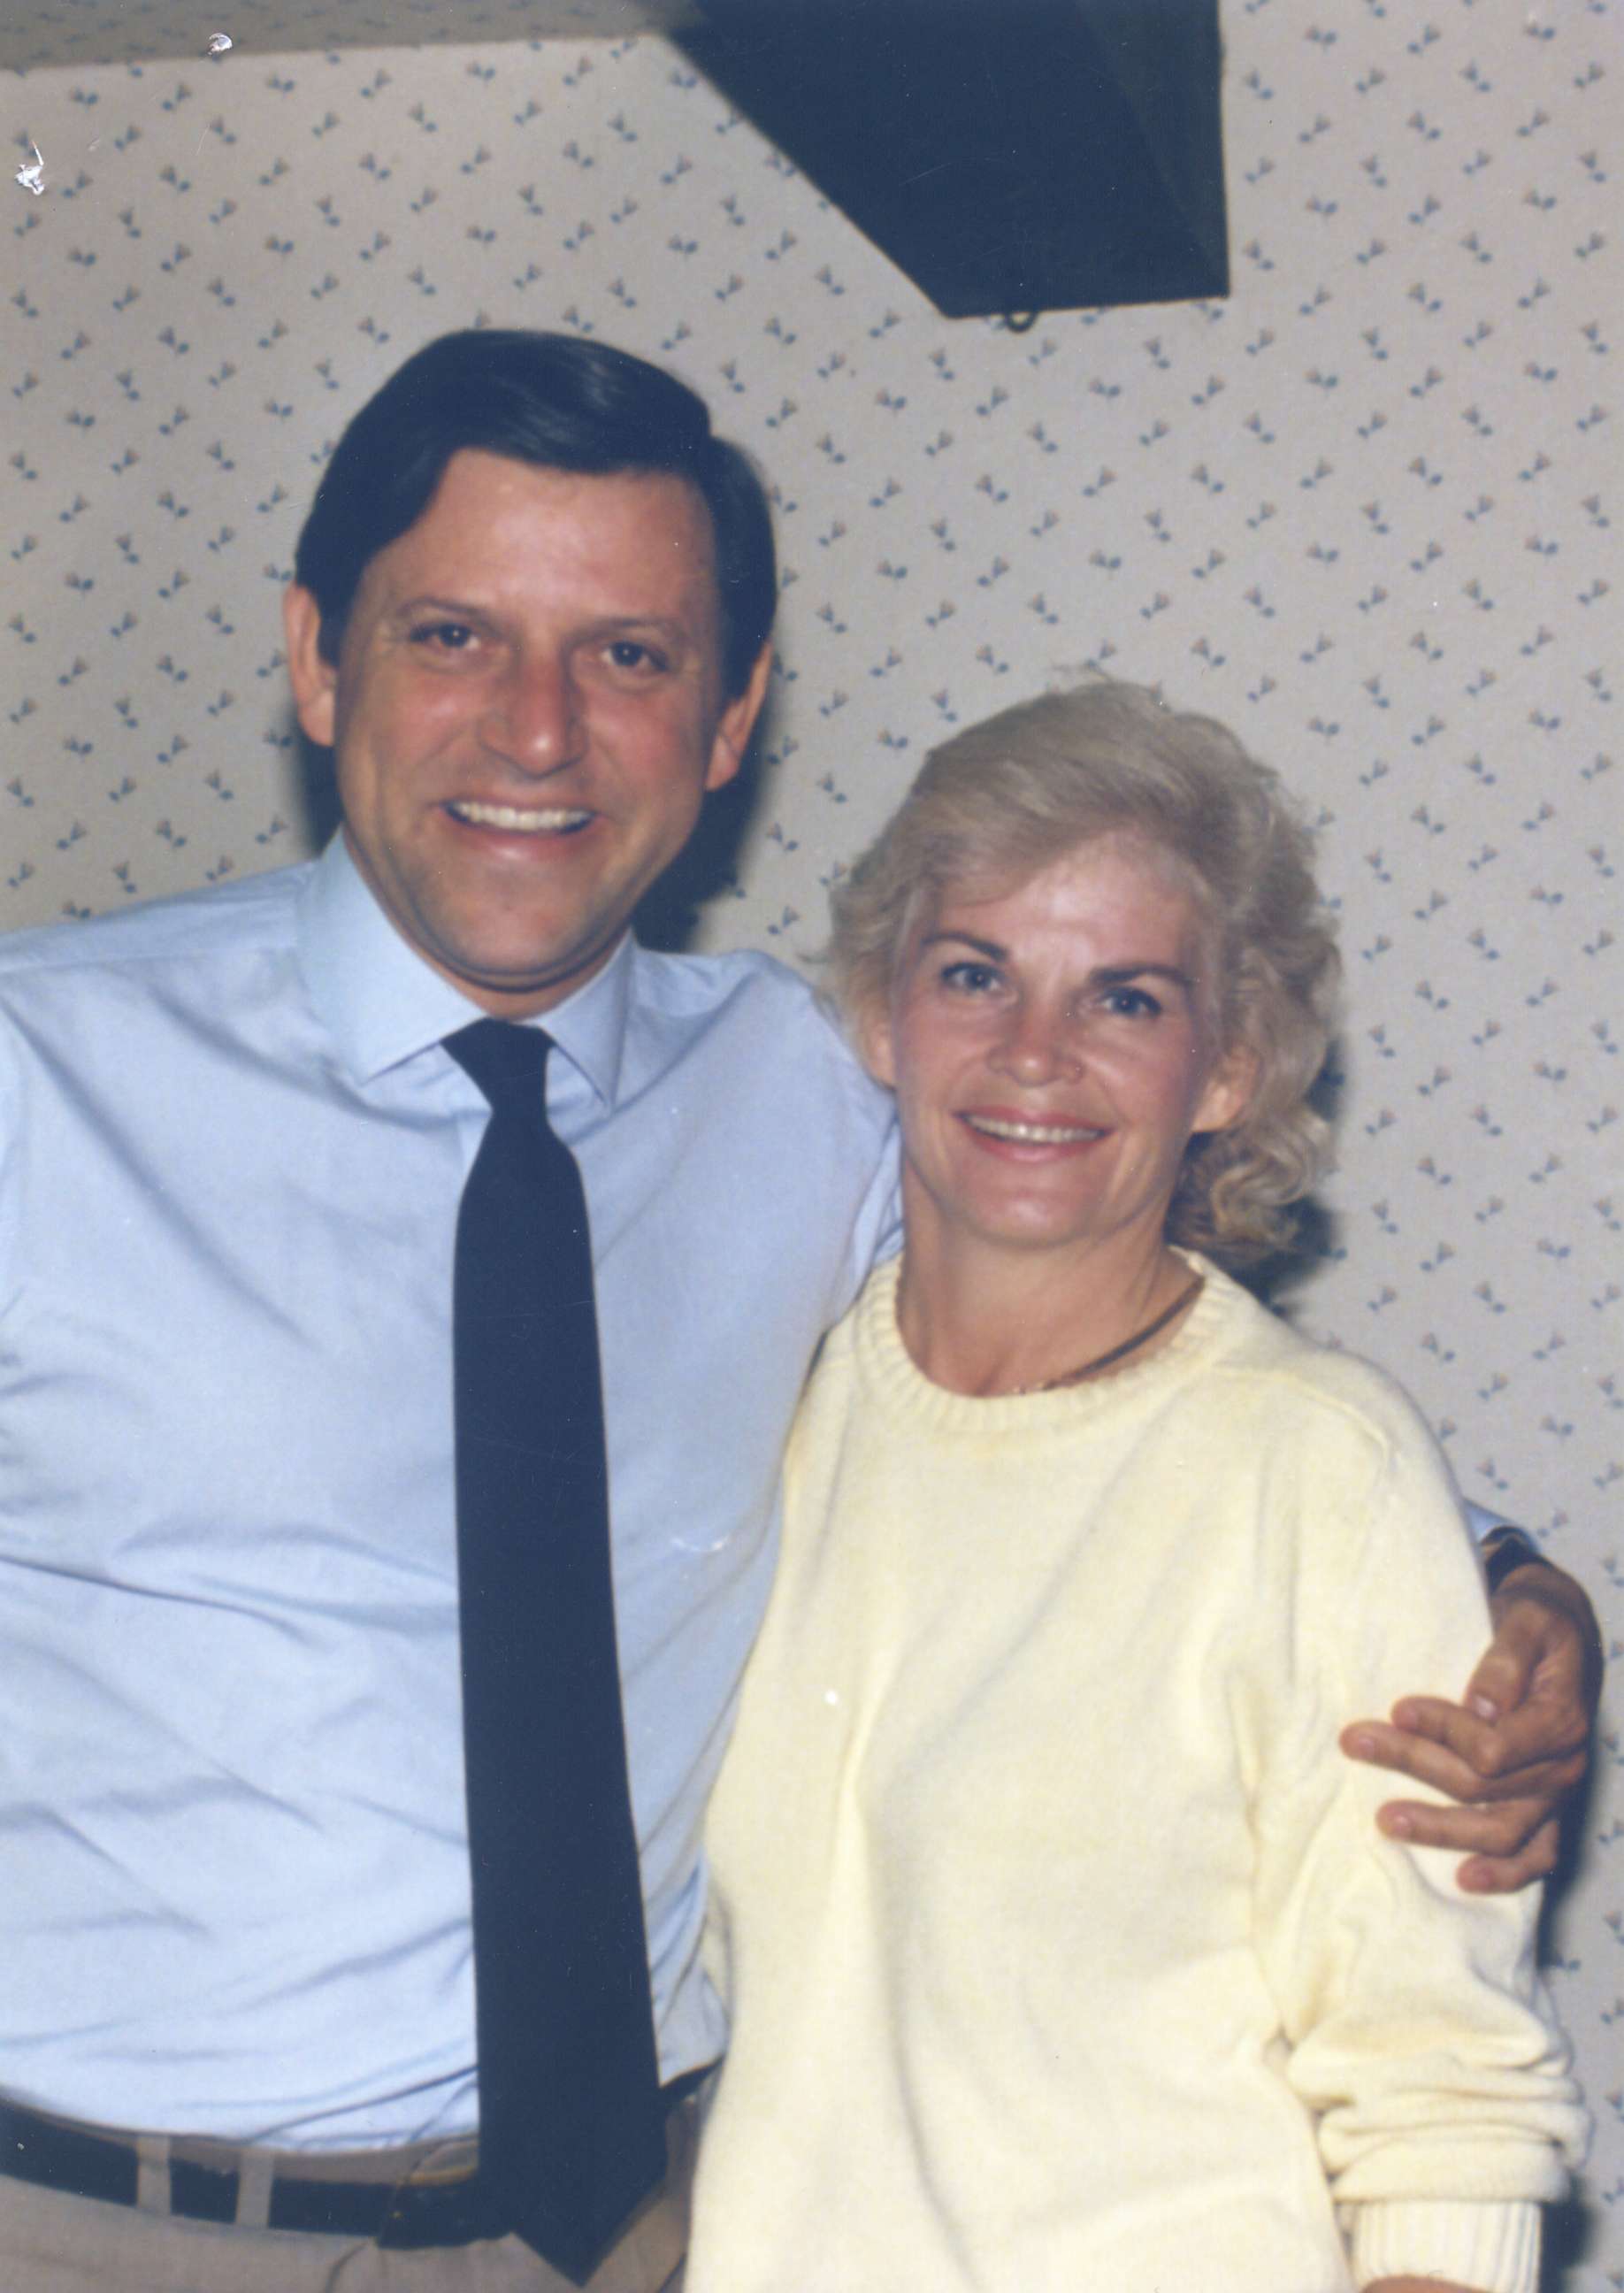 PHOTO: Jose and Kitty Menendez are seen here in this undated family photo.